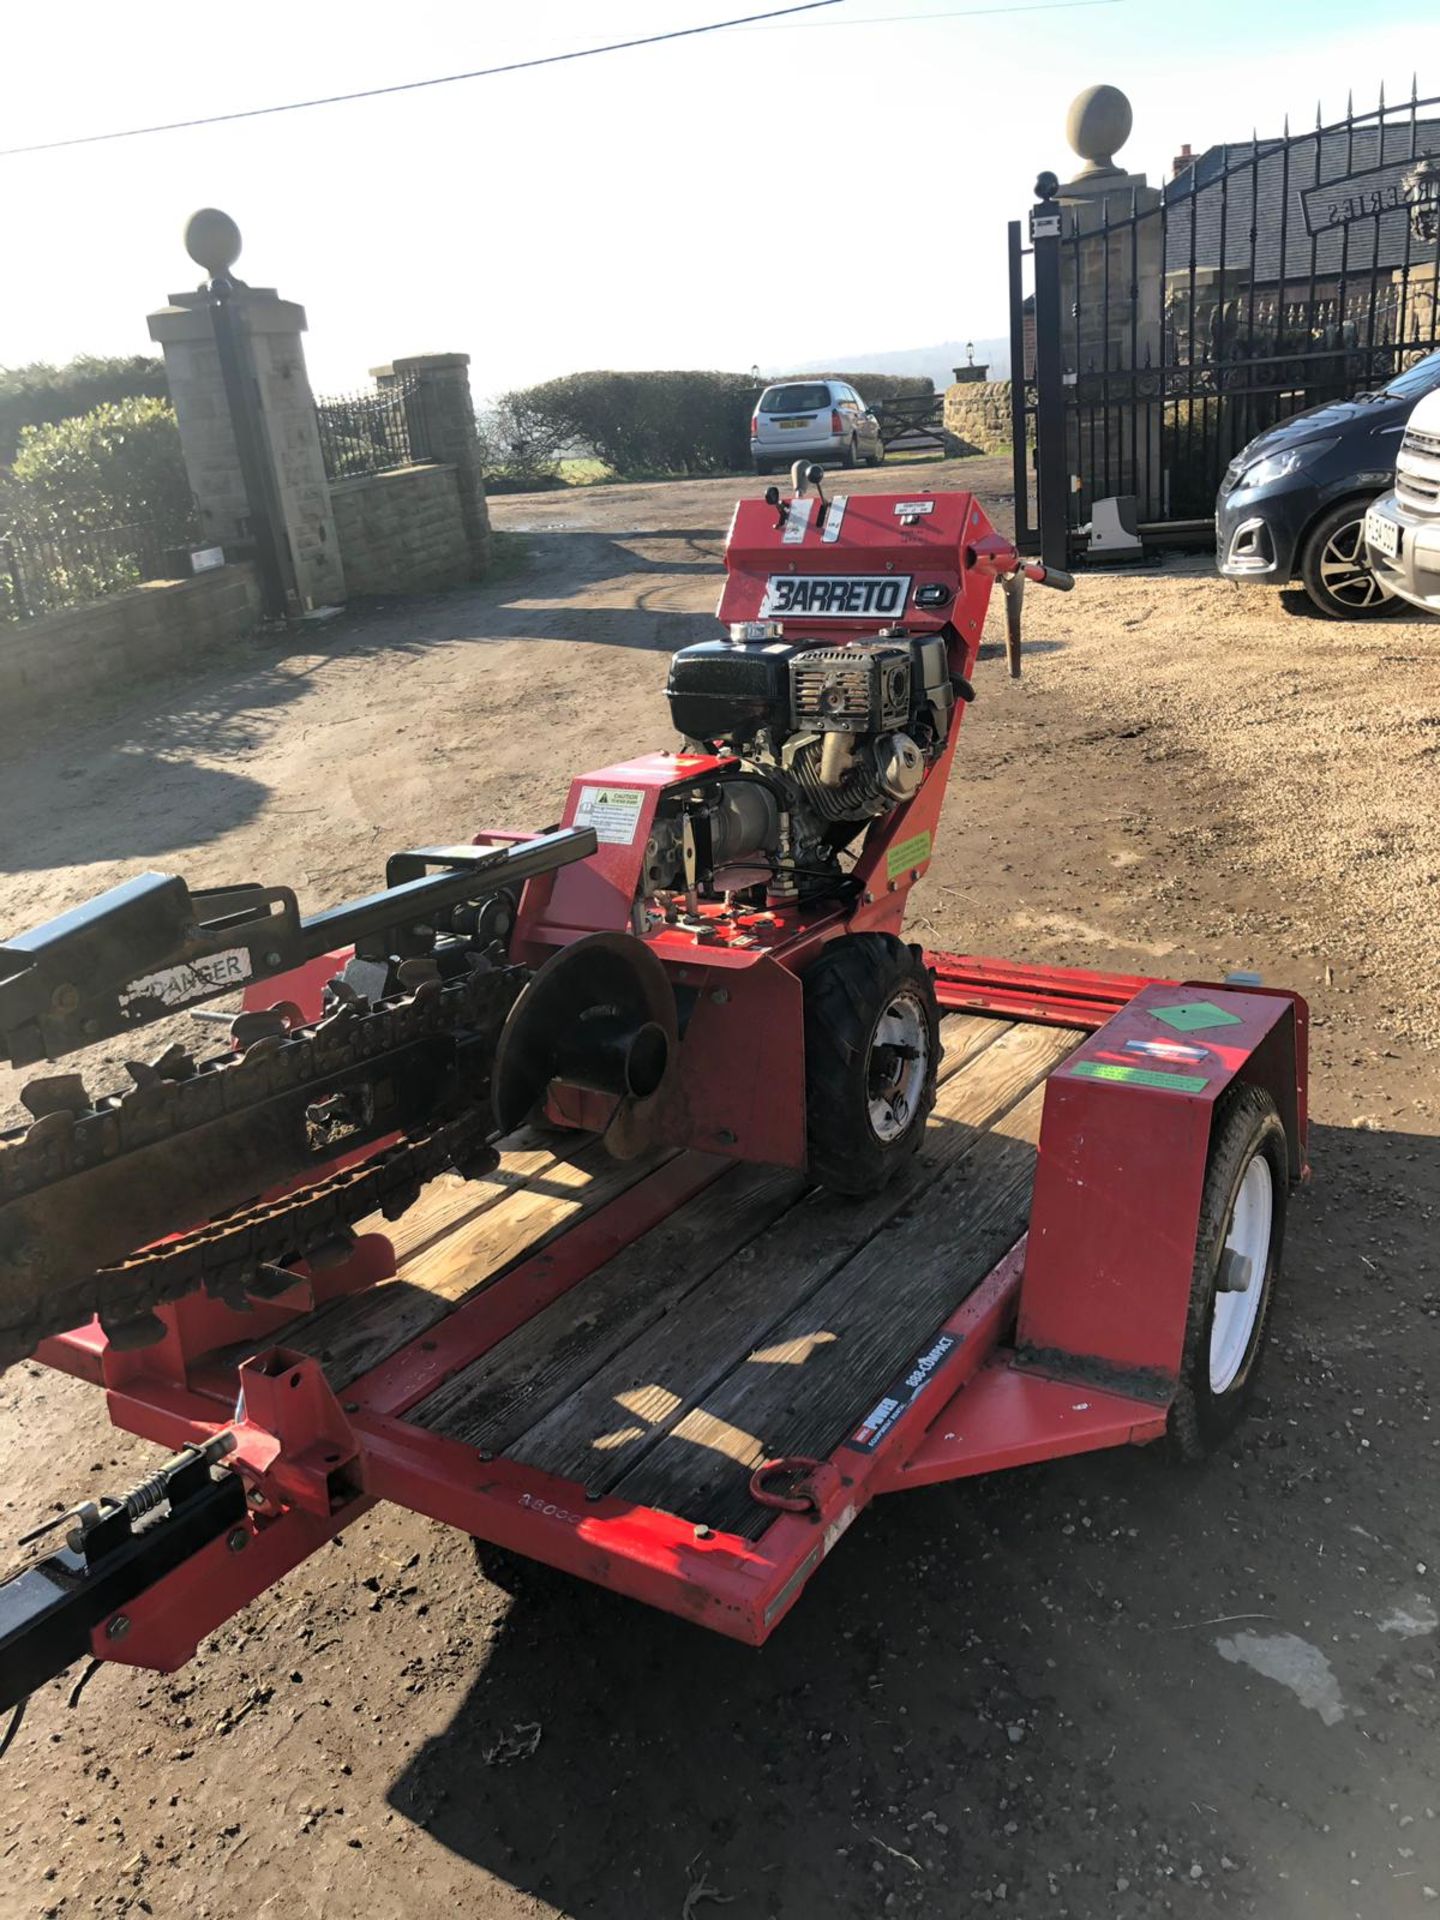 BARRETO 888 COMPACT TRENCHER /TRAILER ONLY 52 HOURS RUNS AND WORKS *PLUS VAT* - Image 2 of 6